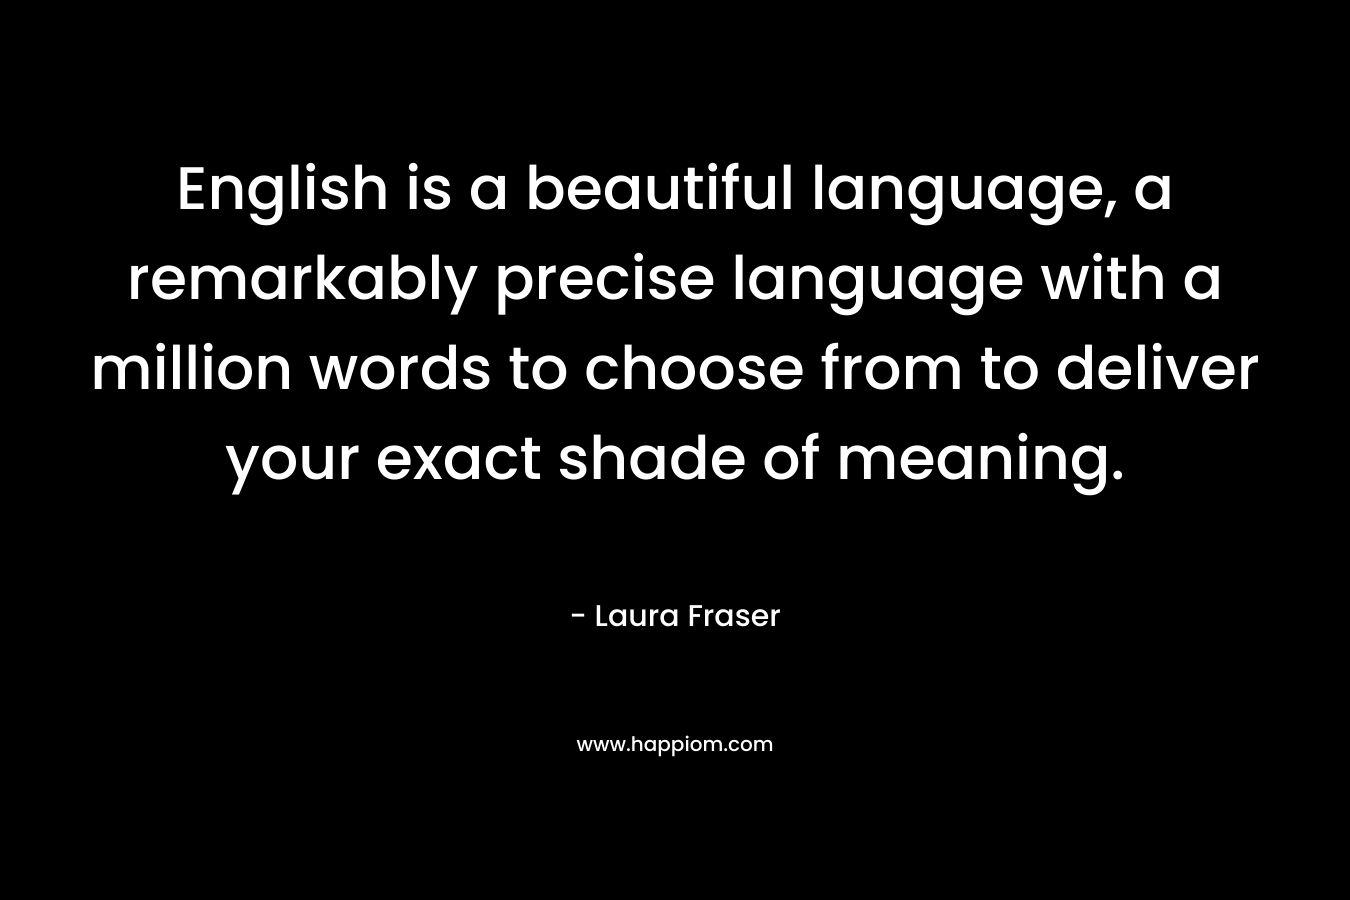 English is a beautiful language, a remarkably precise language with a million words to choose from to deliver your exact shade of meaning. – Laura Fraser